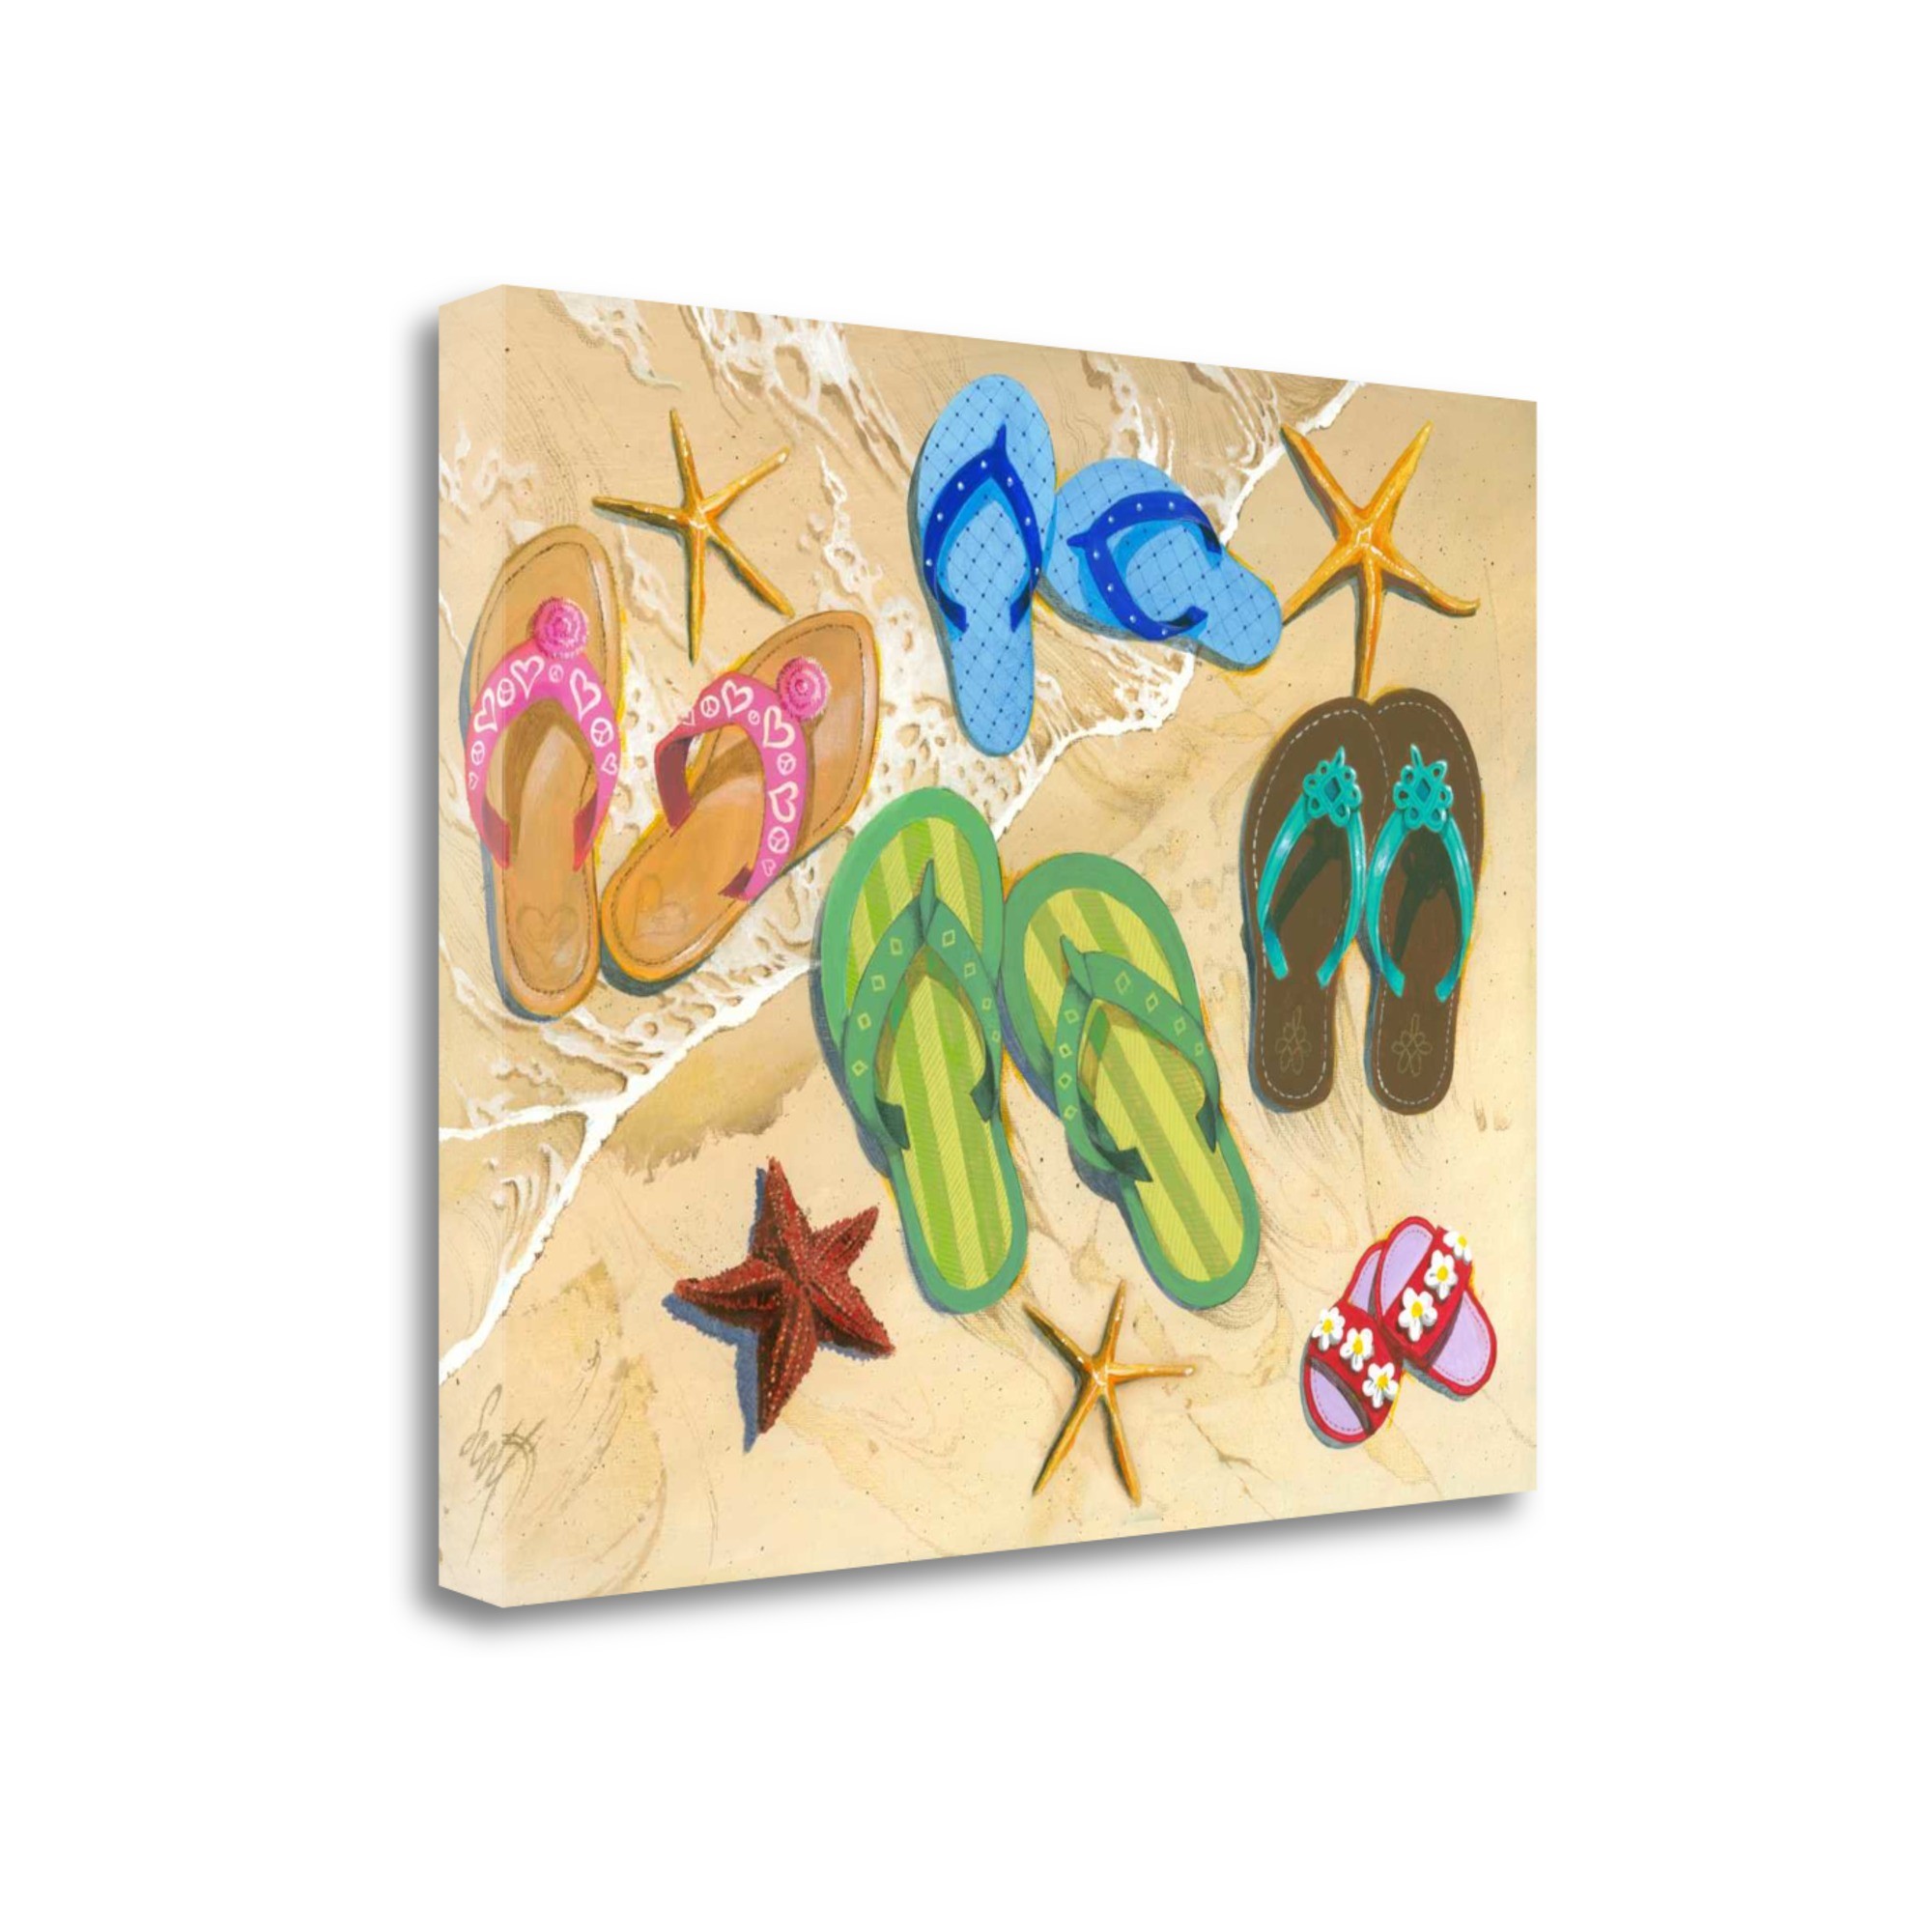 Flip Flops and Starfish 4 Giclee Wrap Canvas Wall Art